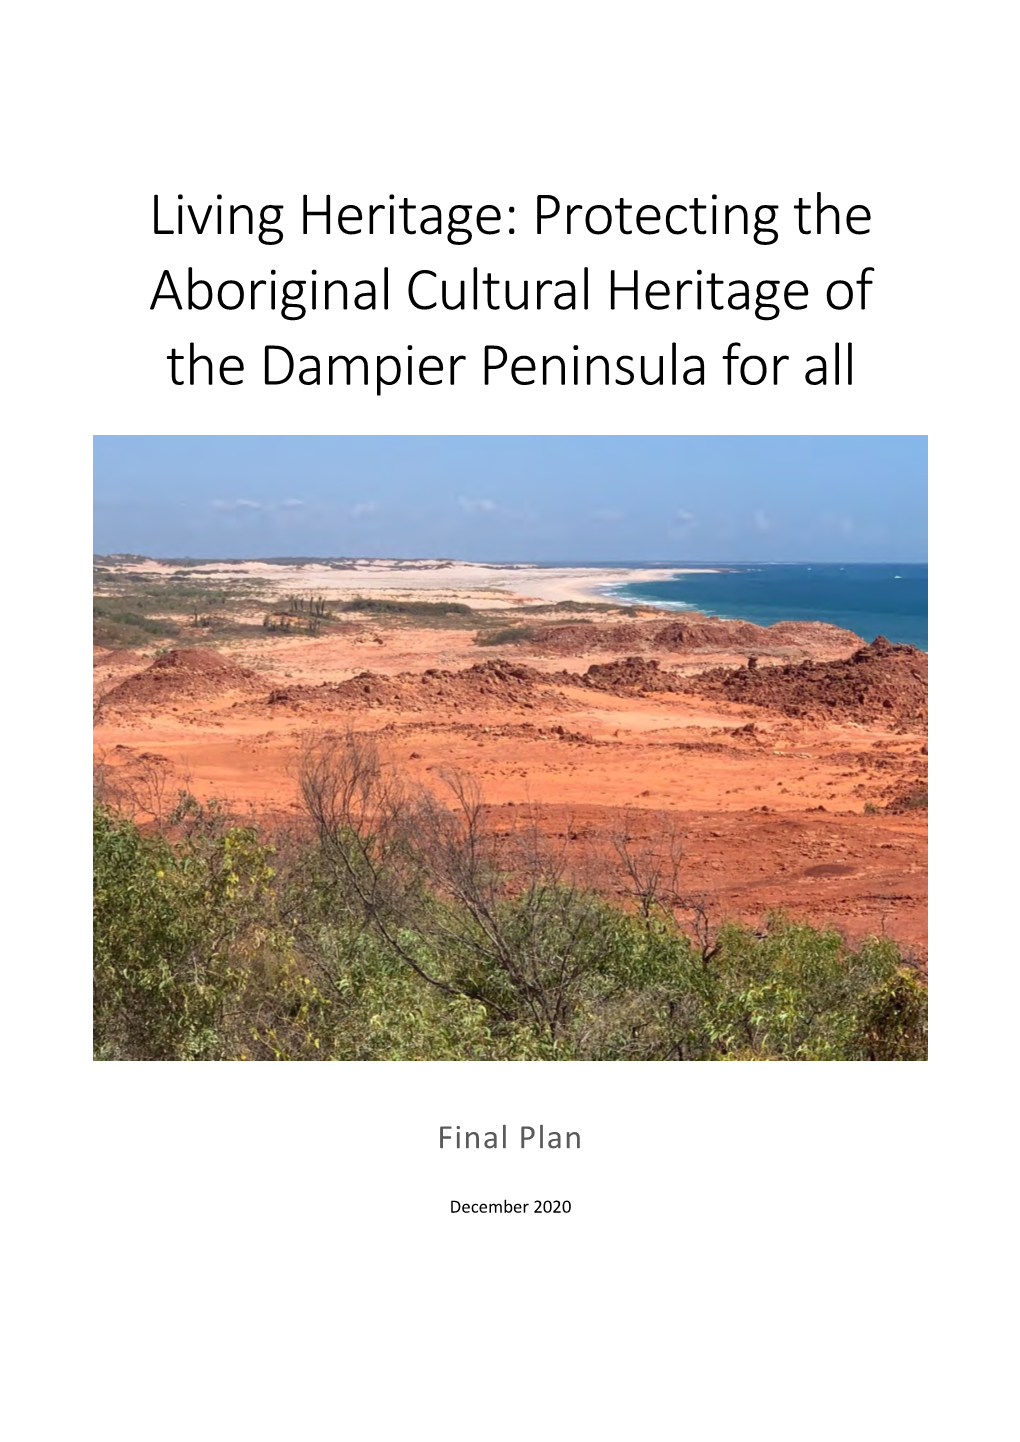 Protecting the Aboriginal Cultural Heritage of the Dampier Peninsula for All